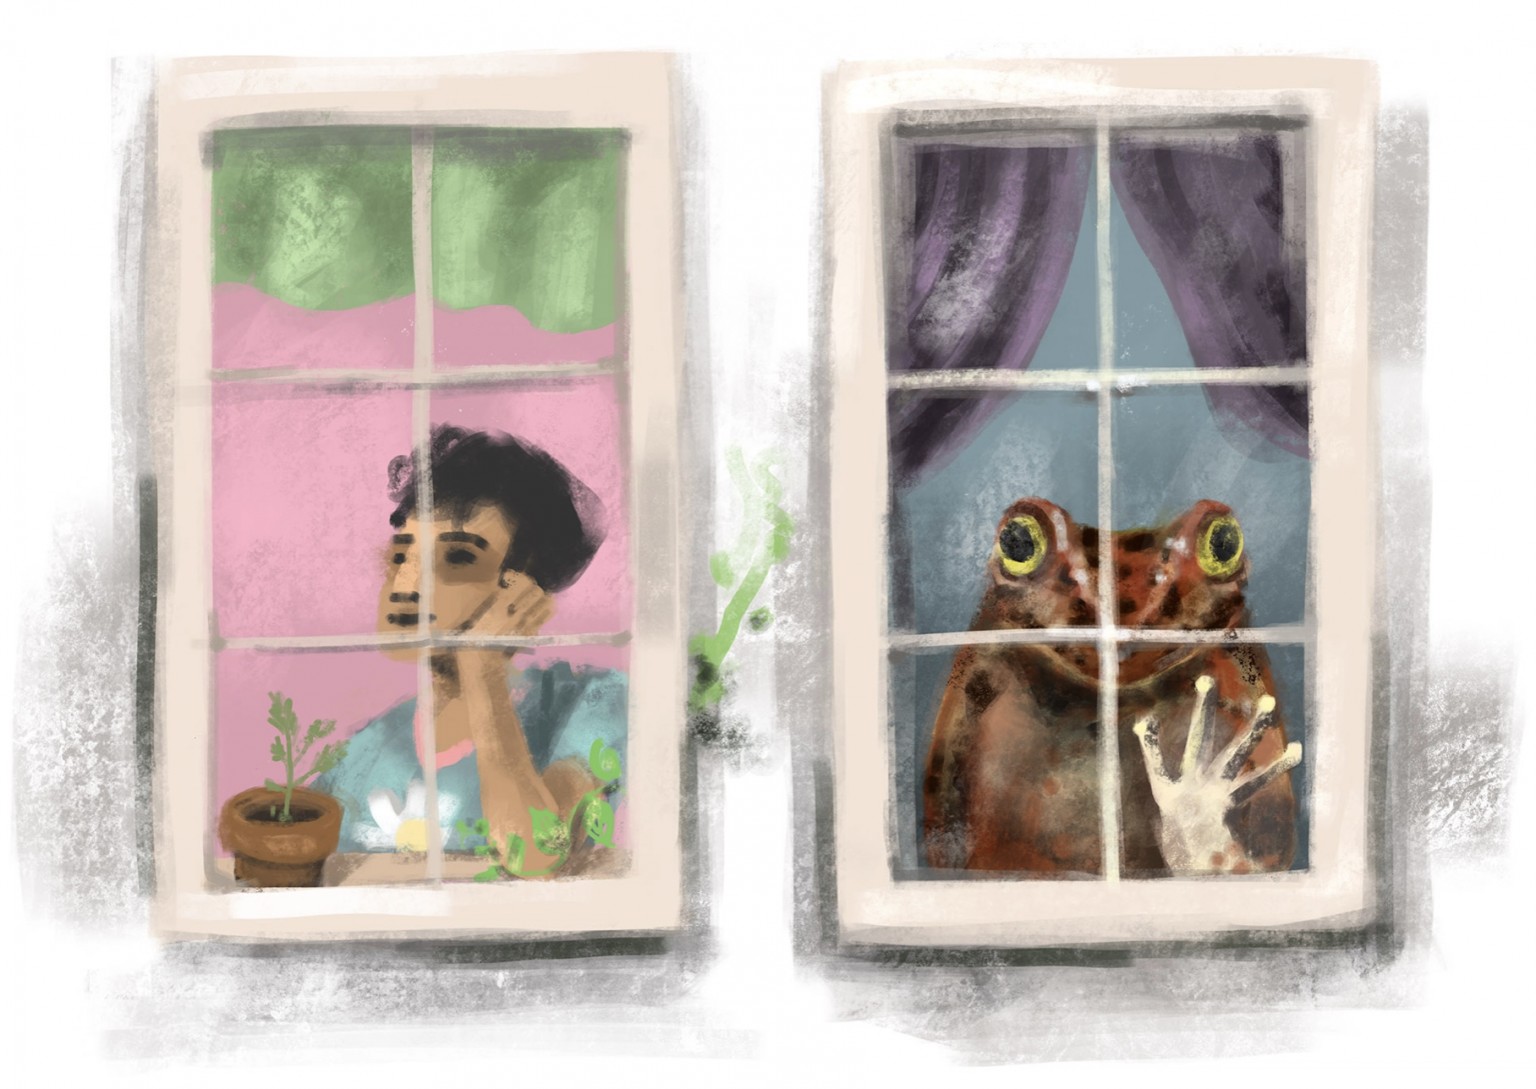 drawing of man and frog in a window